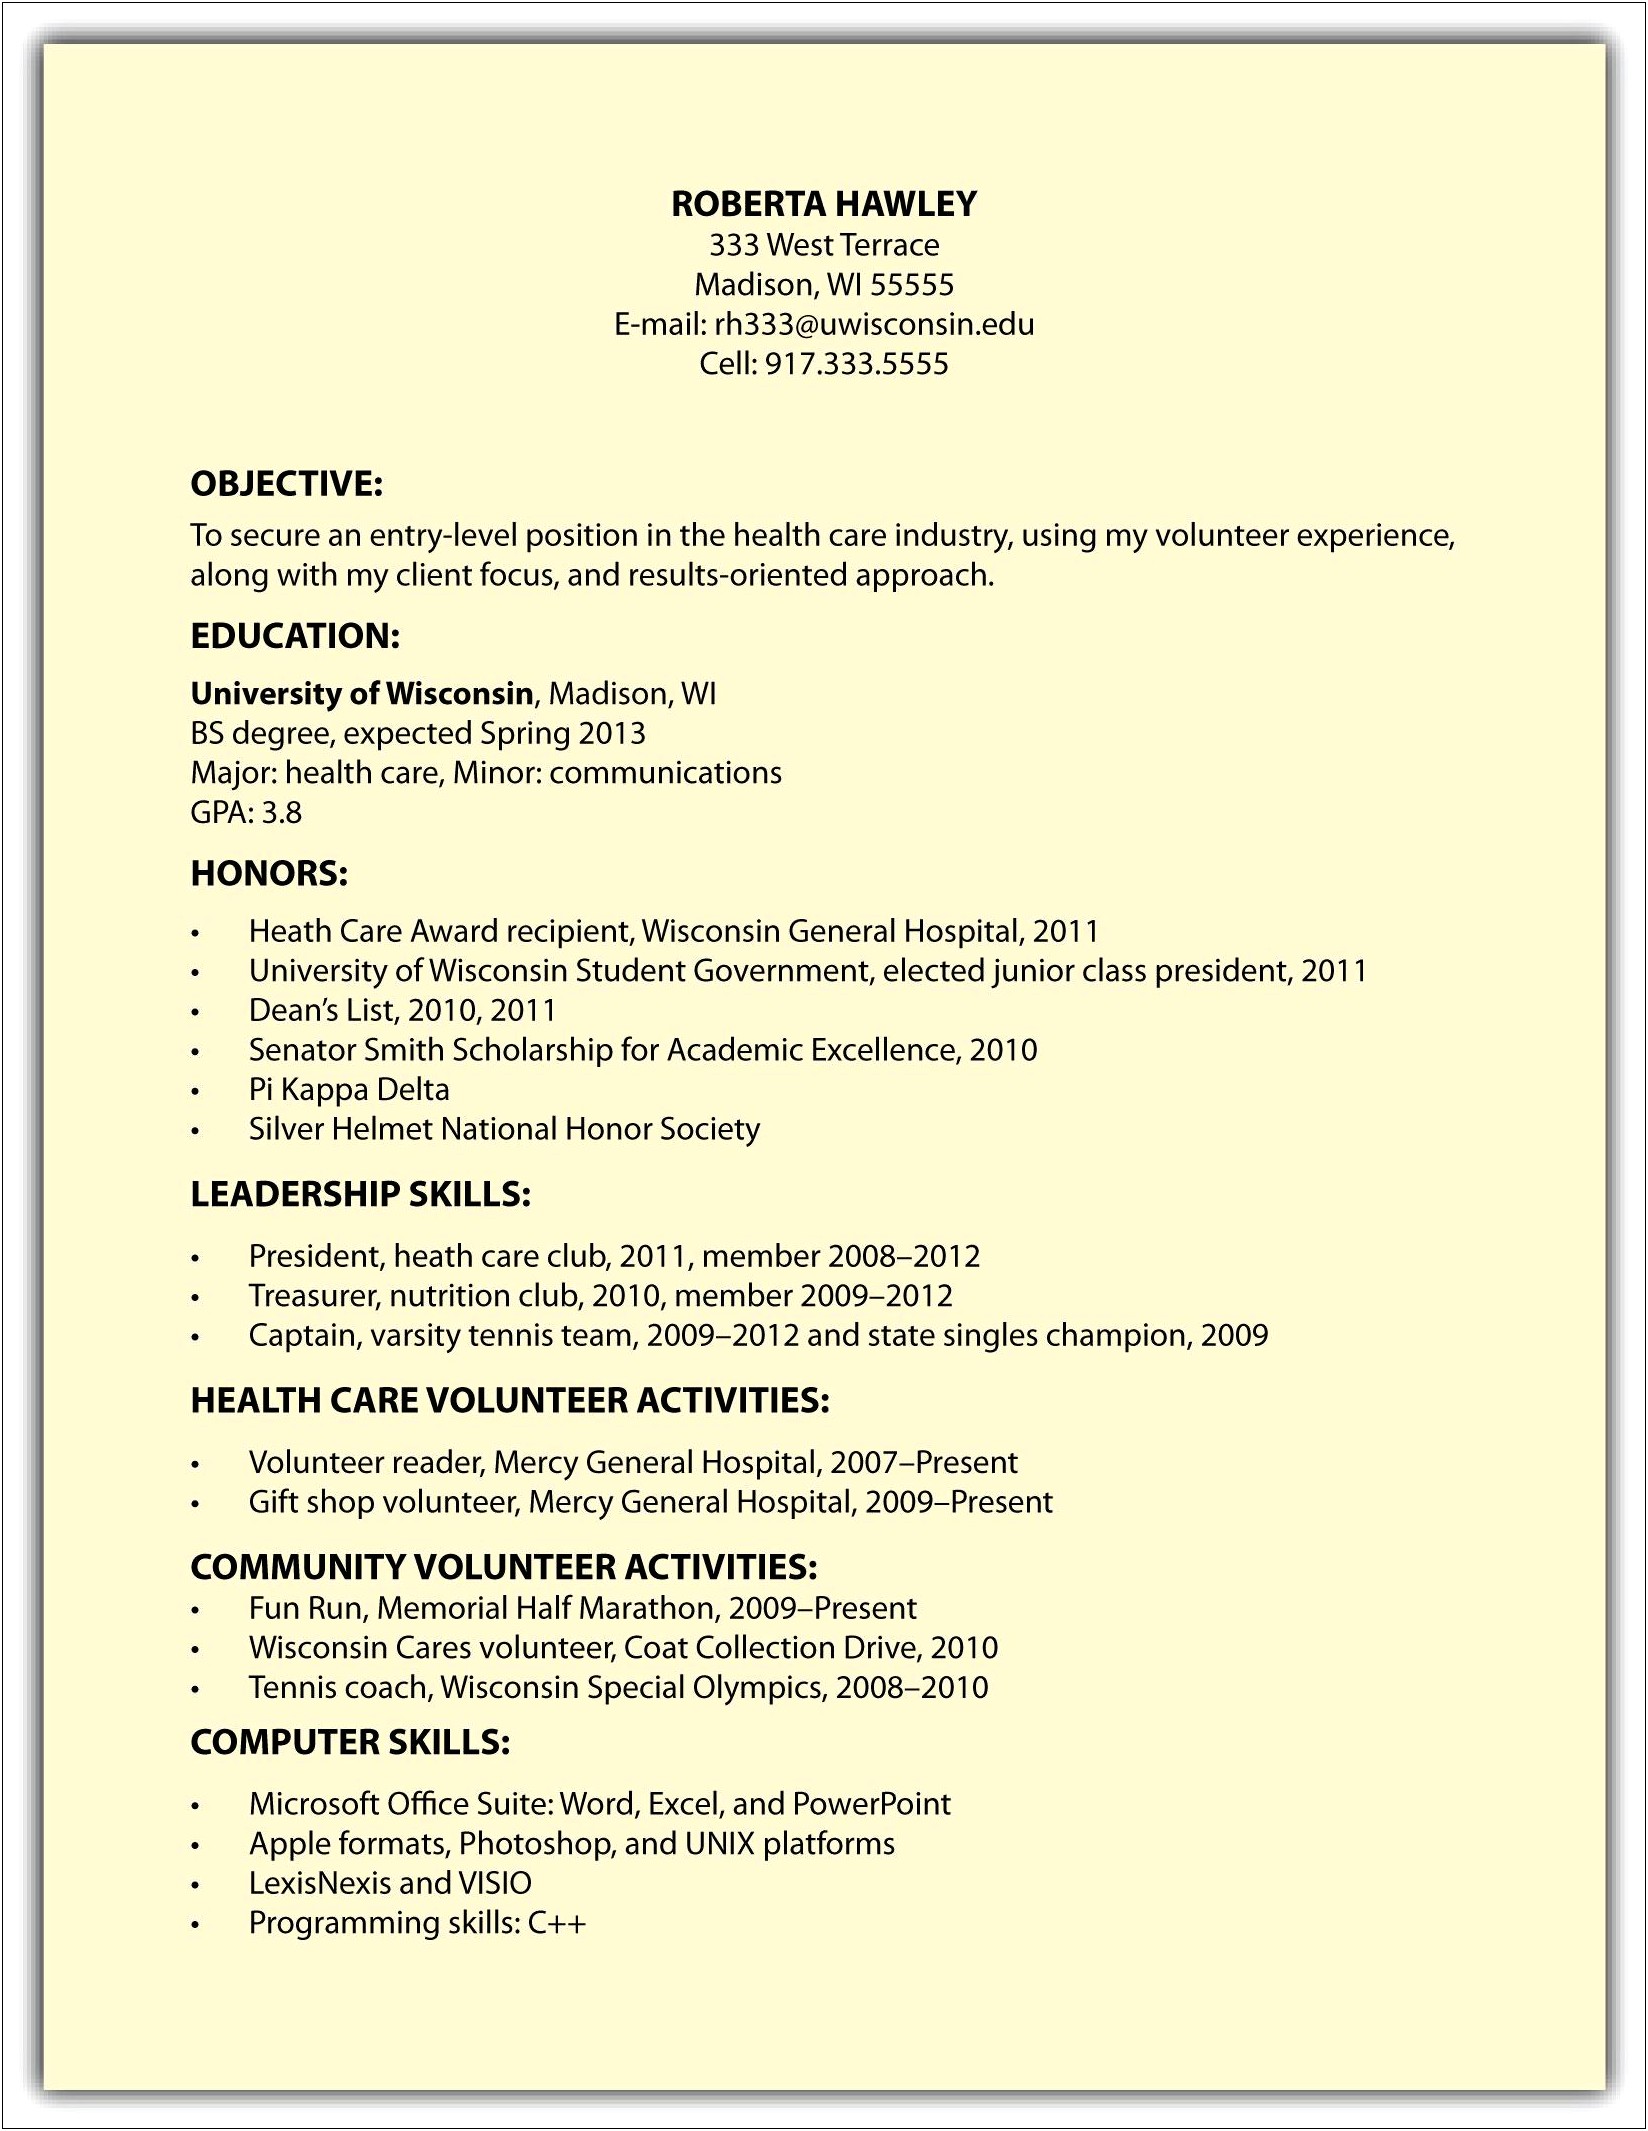 Resume Educationn Formating Examples With A Minor